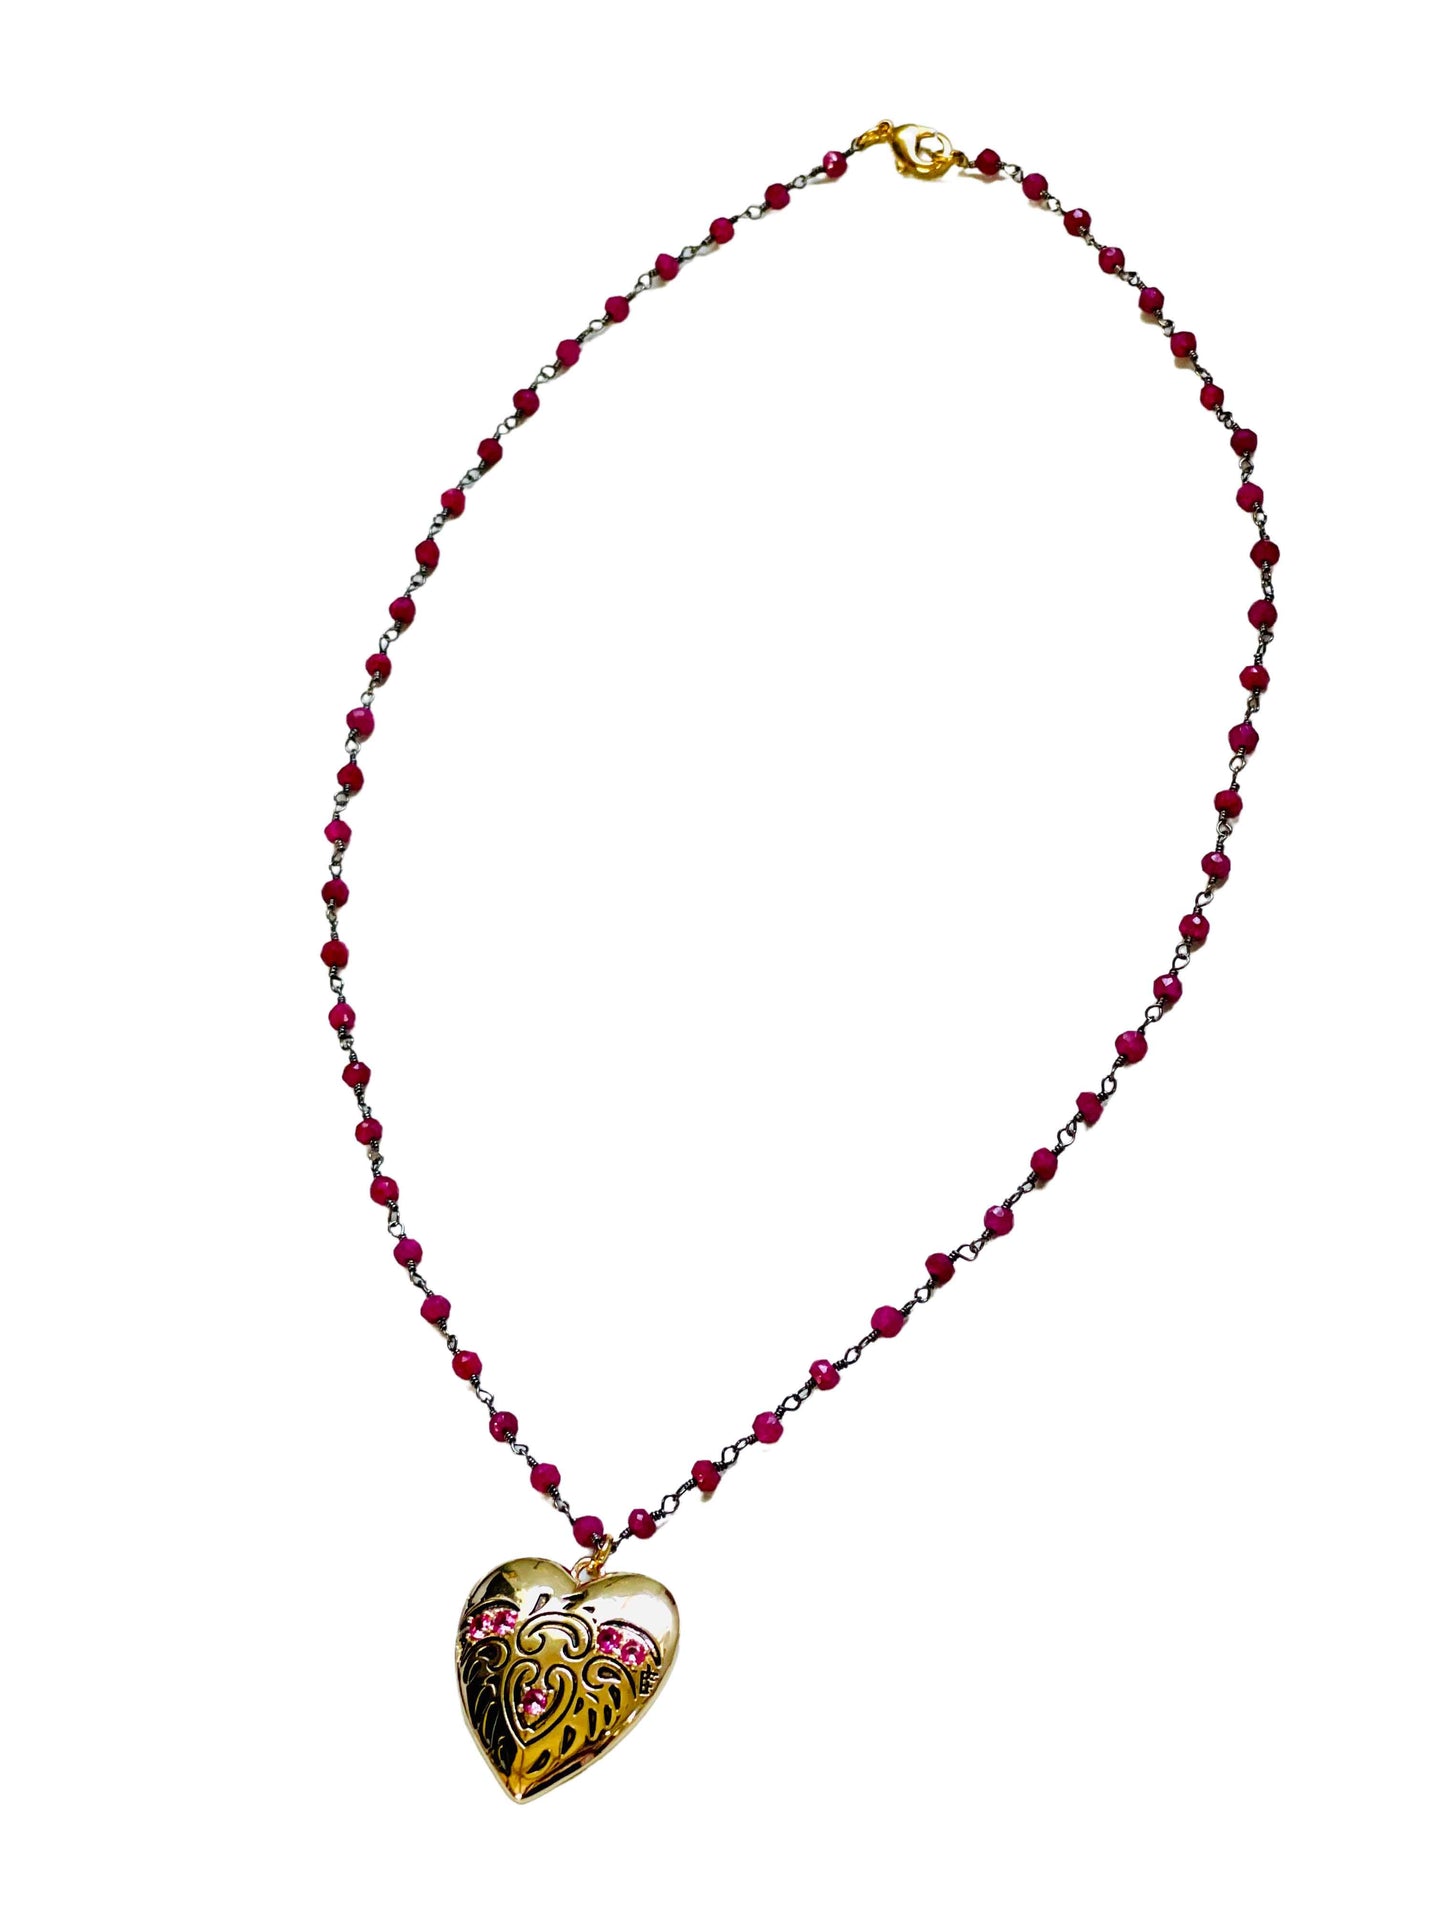 Ruby Heart Locket with Wire Wrapped Ruby Stones Necklace